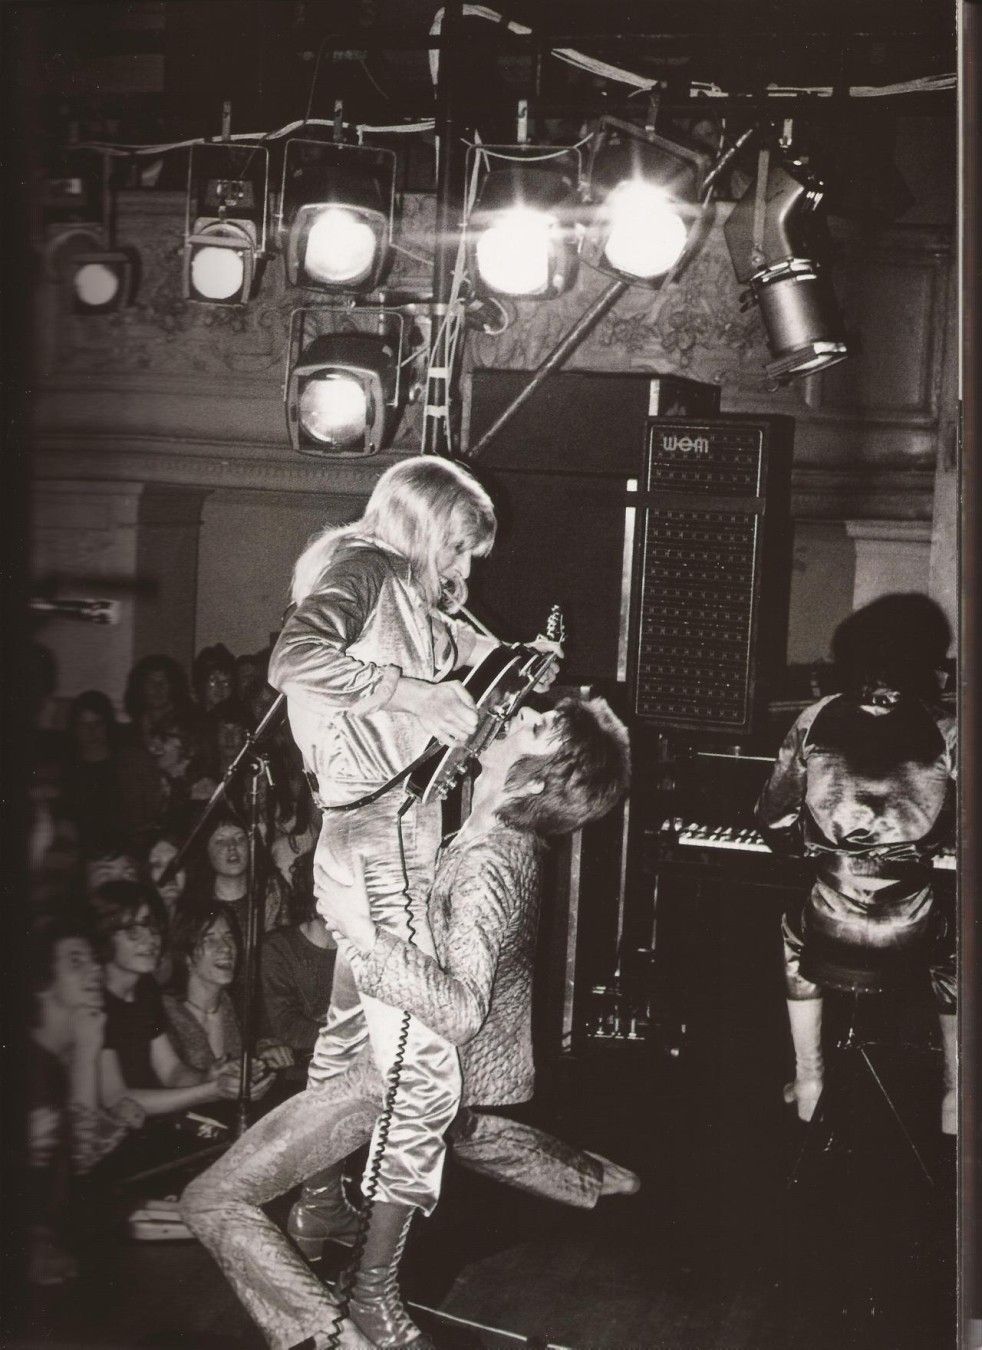 David Bowie “blowjob guitar solo” with Mick Ronson